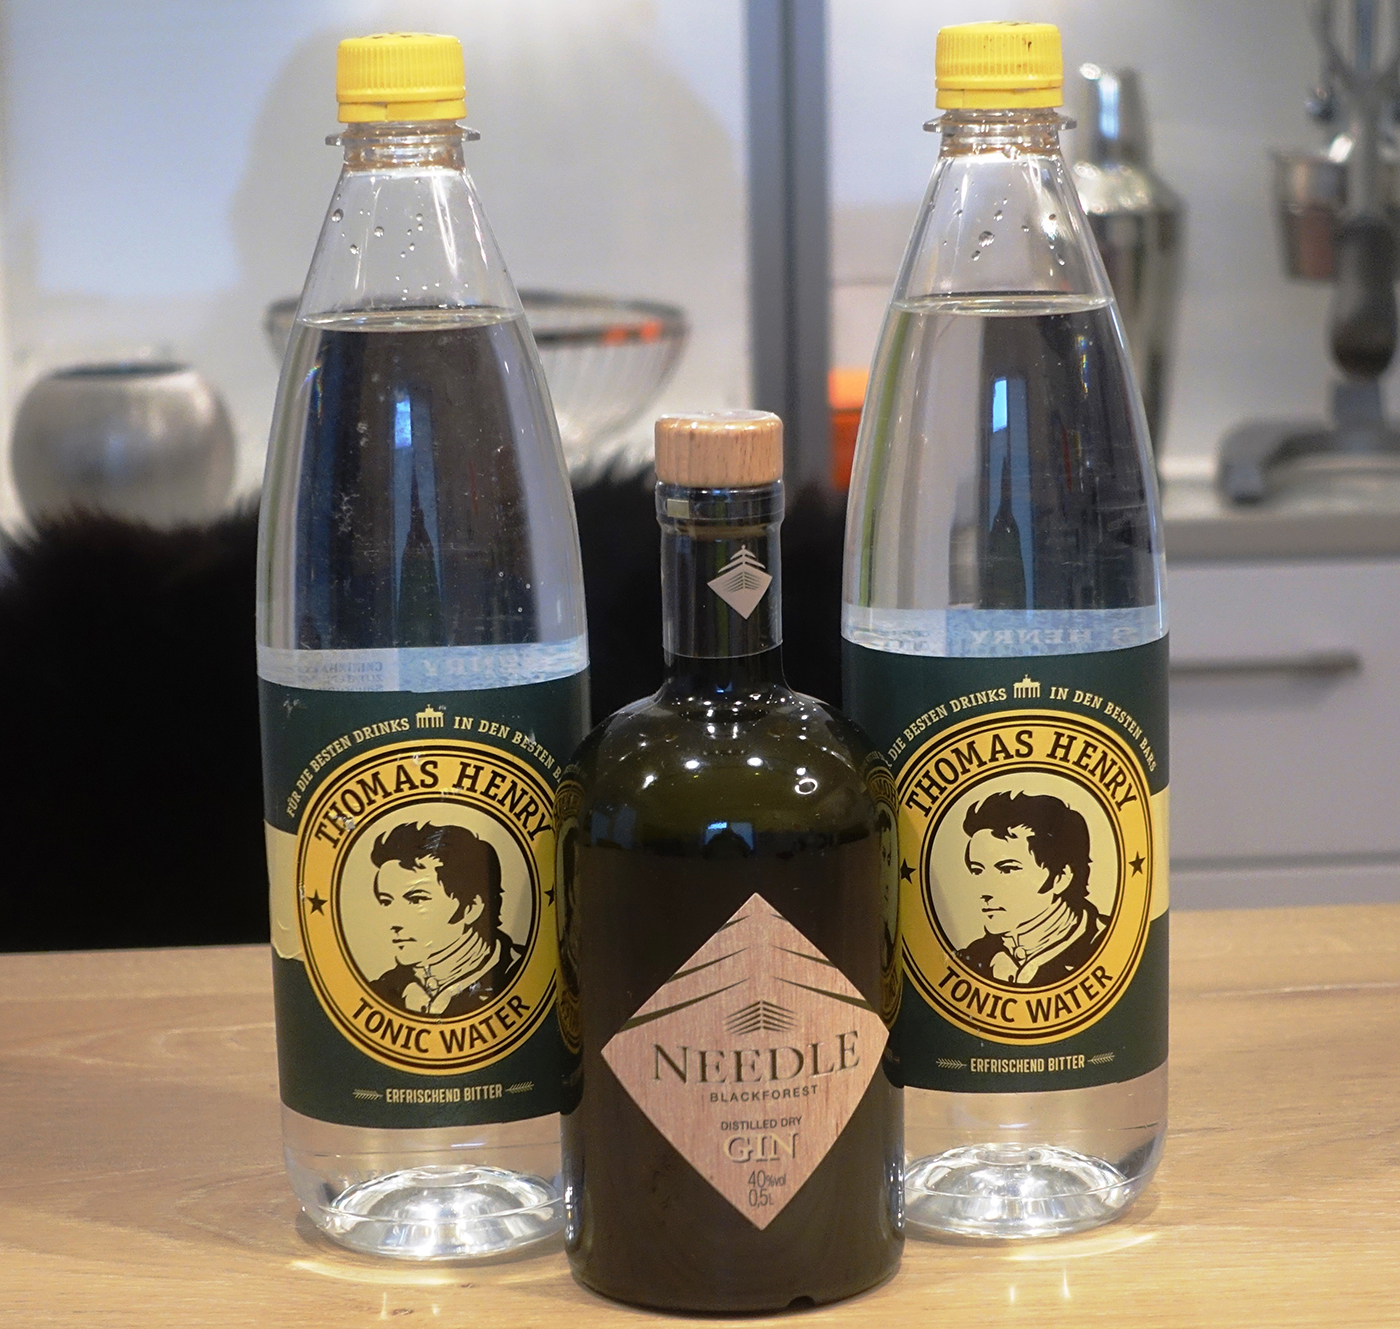 Schwarzwald Gin, 40 %, 0,5l sowie 2 Liter Thomas Henry Tonic Water